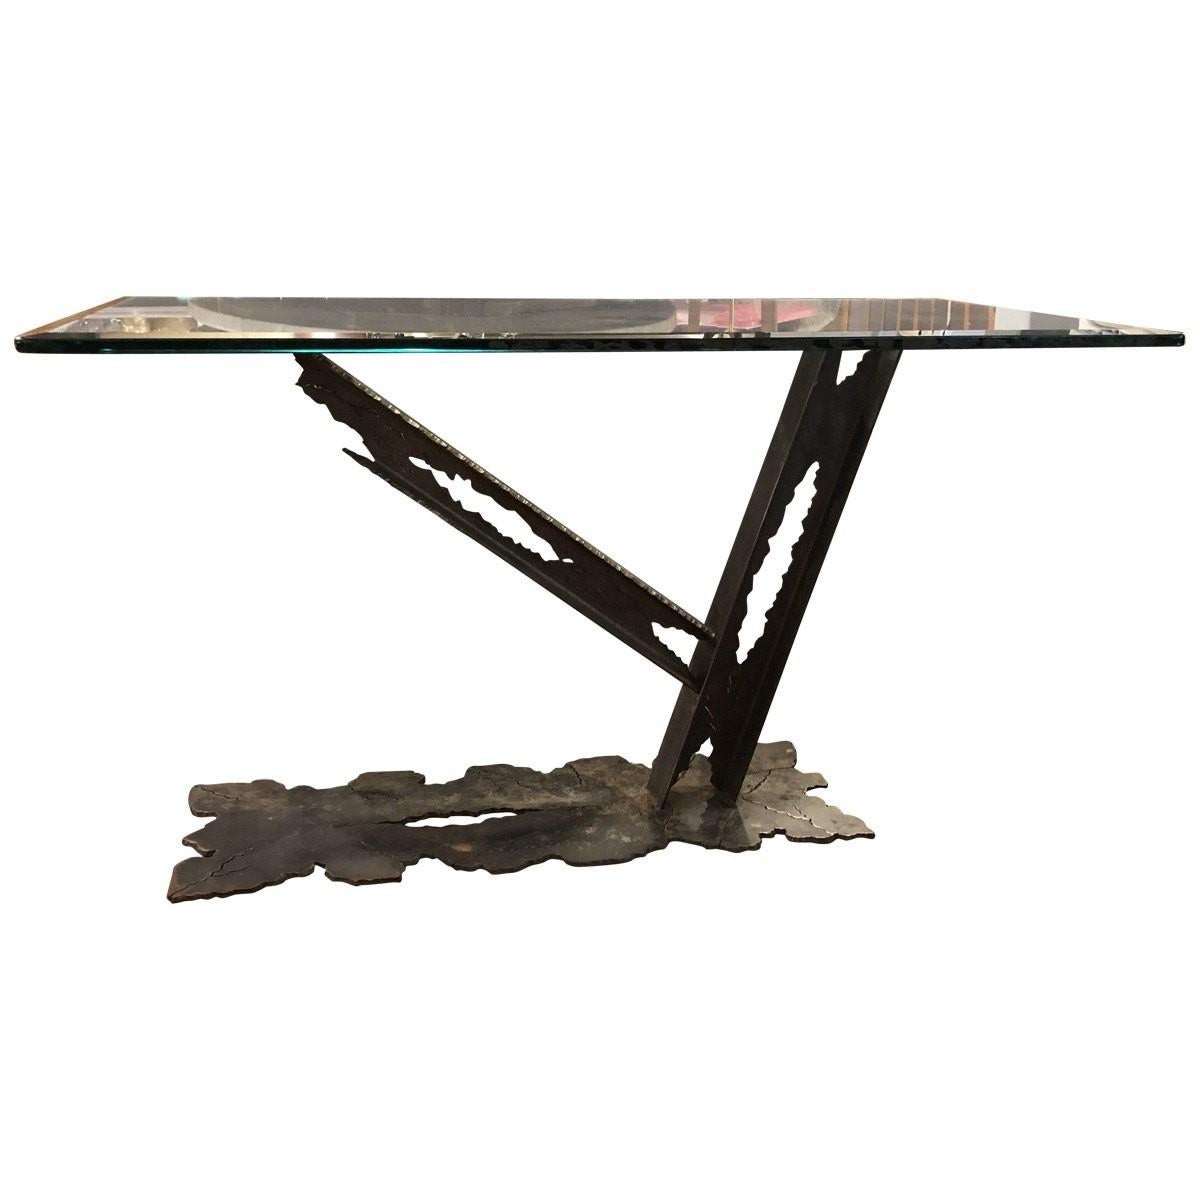 This contemporary modern sculptural studio console table is a sleek and edgy piece that will look great in the eclectic, contemporary space. This handcrafted sculptural steel console table features a base with jagged edges with a rectangular thick